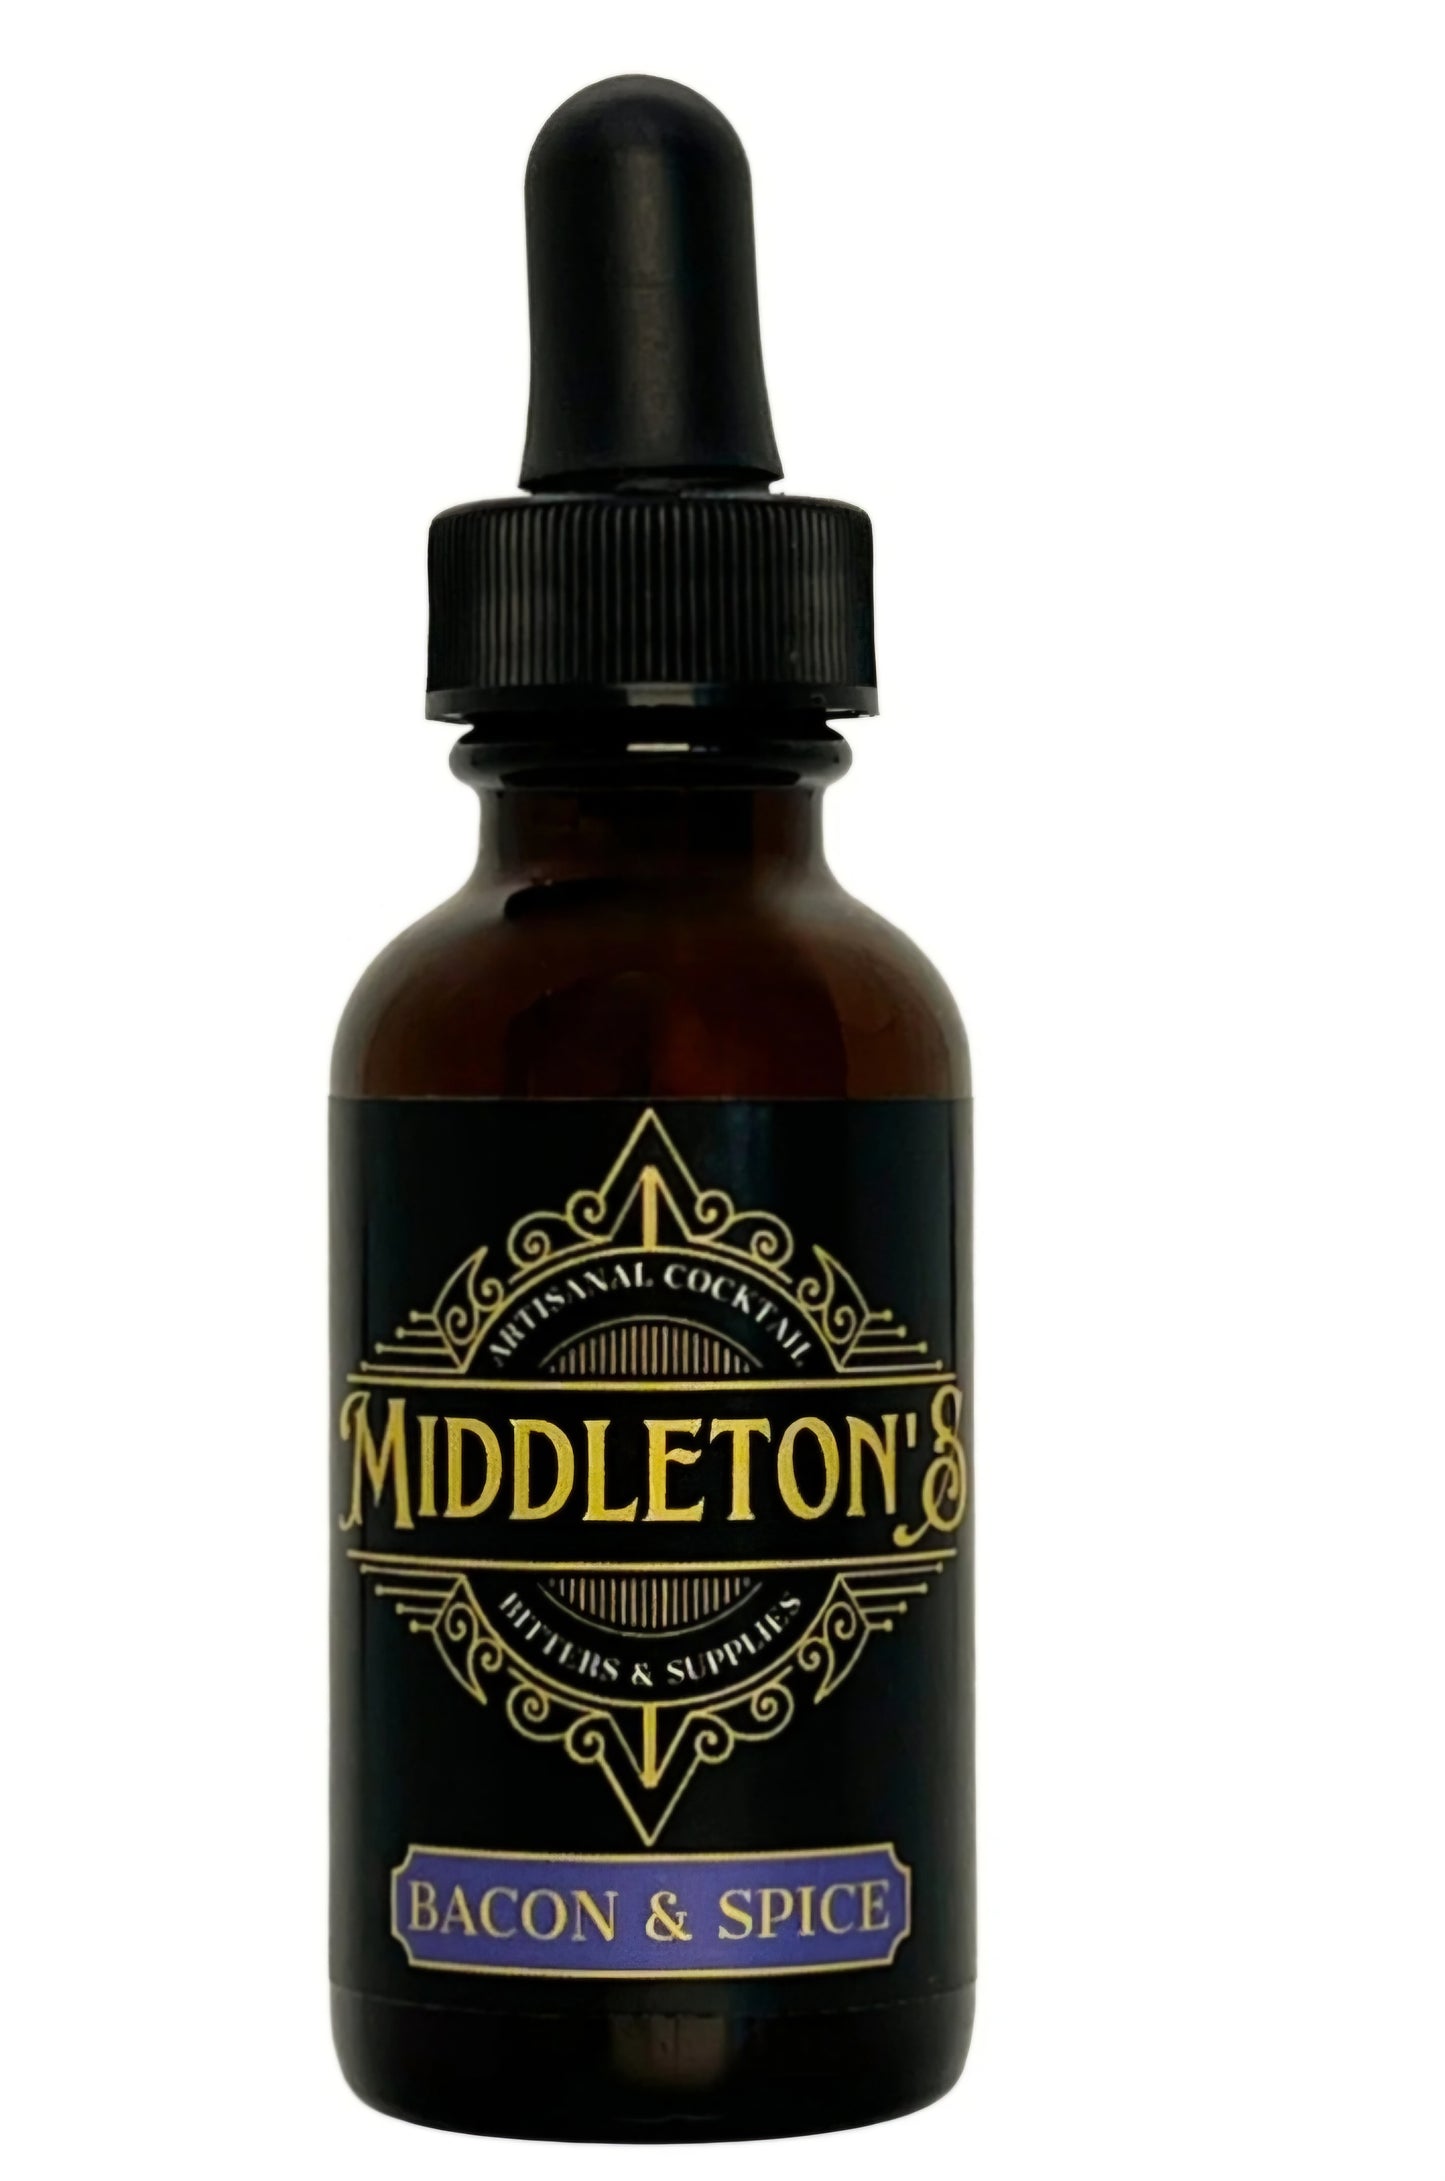 Middletons Bacon and Spice Bitters